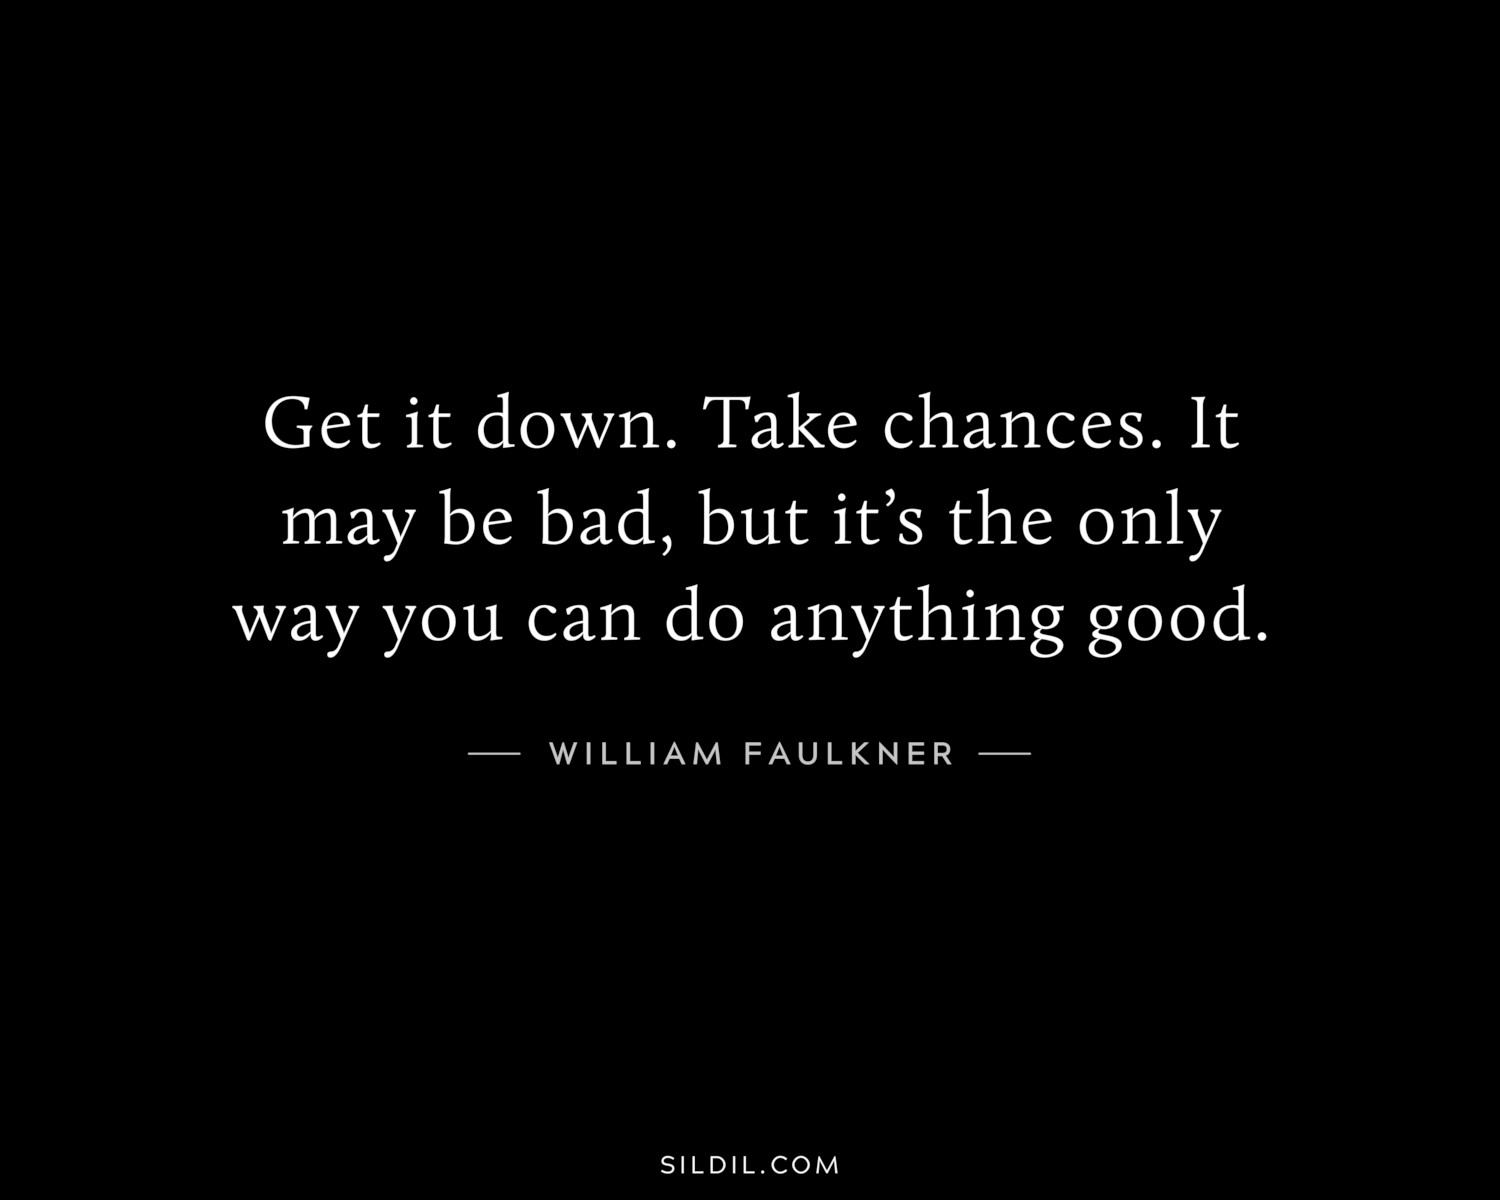 Get it down. Take chances. It may be bad, but it’s the only way you can do anything good.